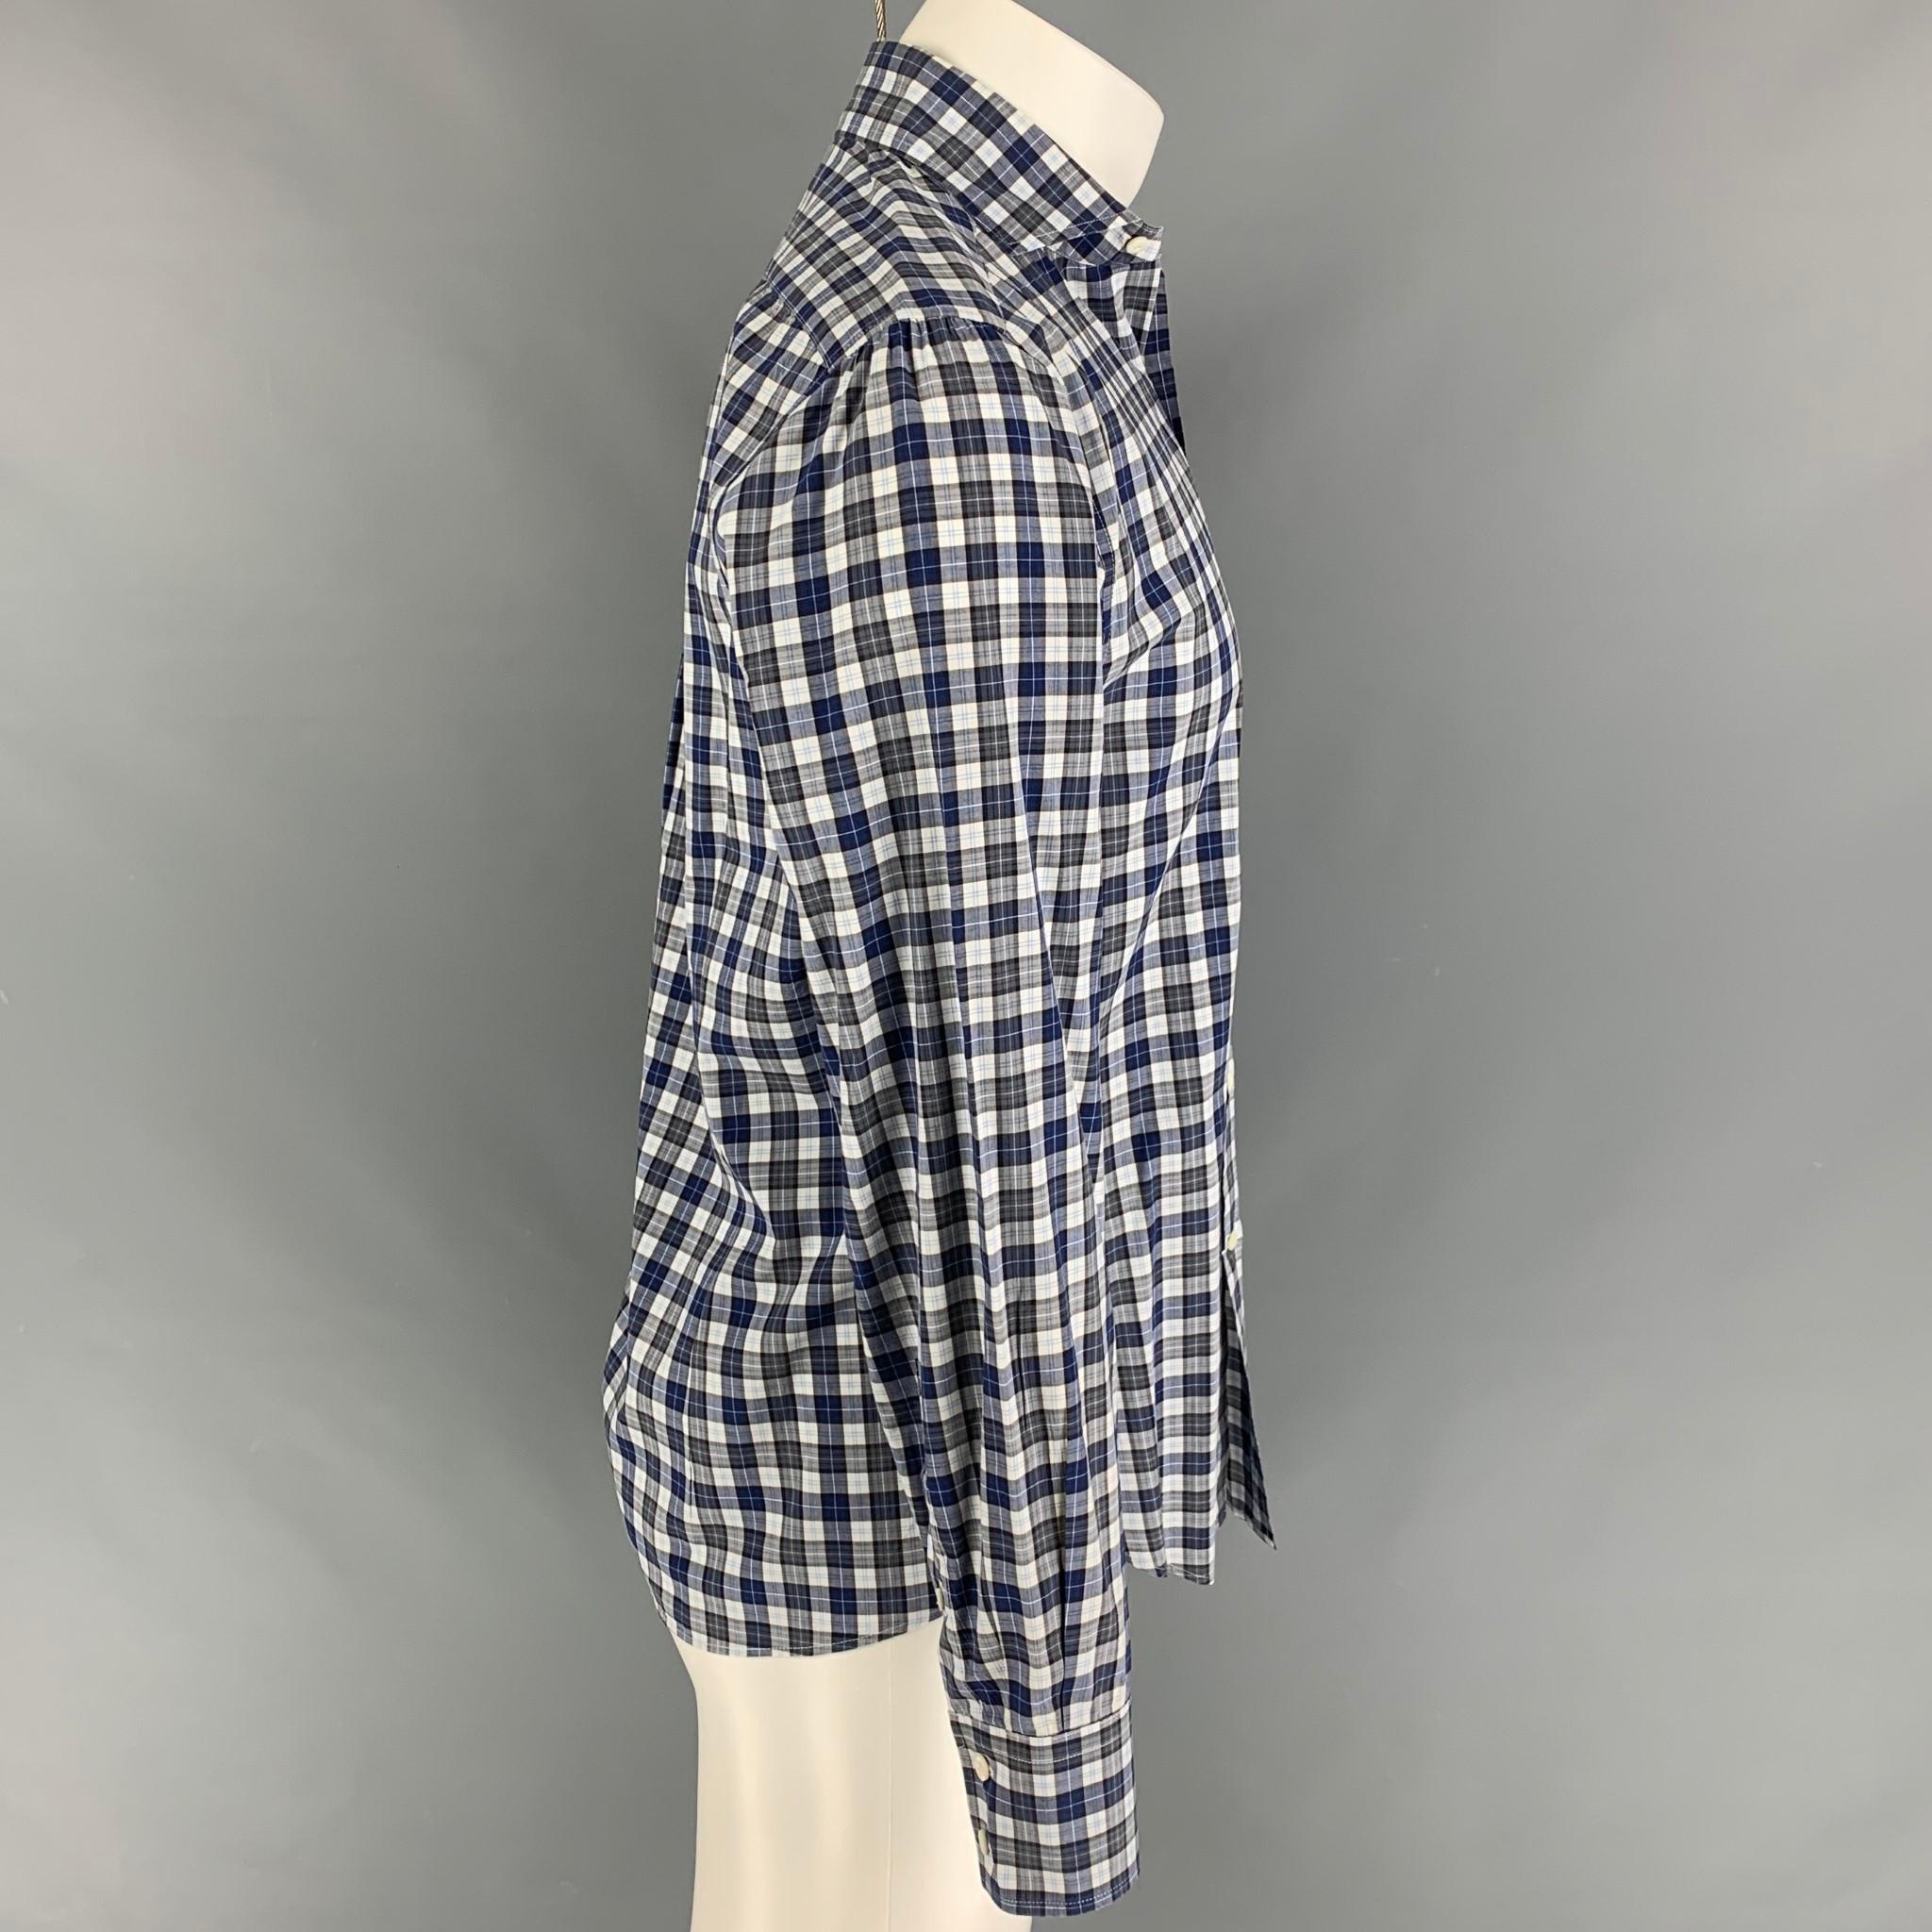 BRUNELLO CUCINELLI long sleeve shirt comes in a blue & white checkered cotton featuring a slim fit, spread collar, and a buttoned closure. 

Excellent Pre-Owned Condition.
Marked: M

Measurements:

Shoulder: 18 in.
Chest: 40 in.
Sleeve: 25